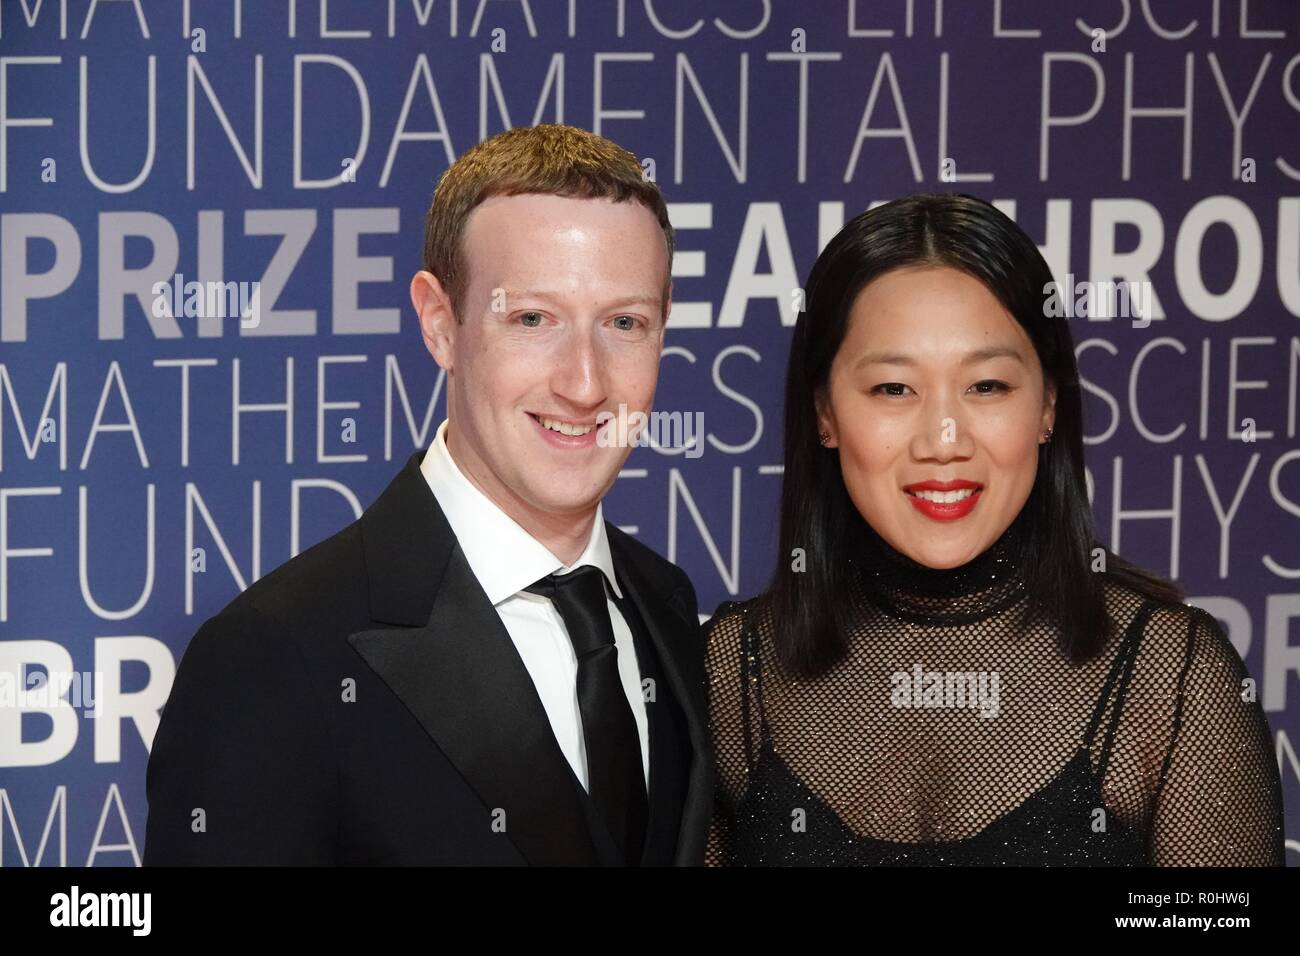 San Francisco, USA. 4th Nov, 2018. Founder and CEO of Facebook Mark Zuckerberg (L) and his wife Priscilla Chan attend the awarding ceremony of the 2019 Breakthrough Prize in San Francisco, the United States, on Nov. 4, 2018. The Breakthrough Prize Foundation held a grand gala Sunday night in northern California to award a total of 21 million U.S. dollars worth of prizes to the world's top scientists for their remarkable achievements in fundamental physics, life sciences, and mathematics. Credit: Wu Xiaoling/Xinhua/Alamy Live News Stock Photo